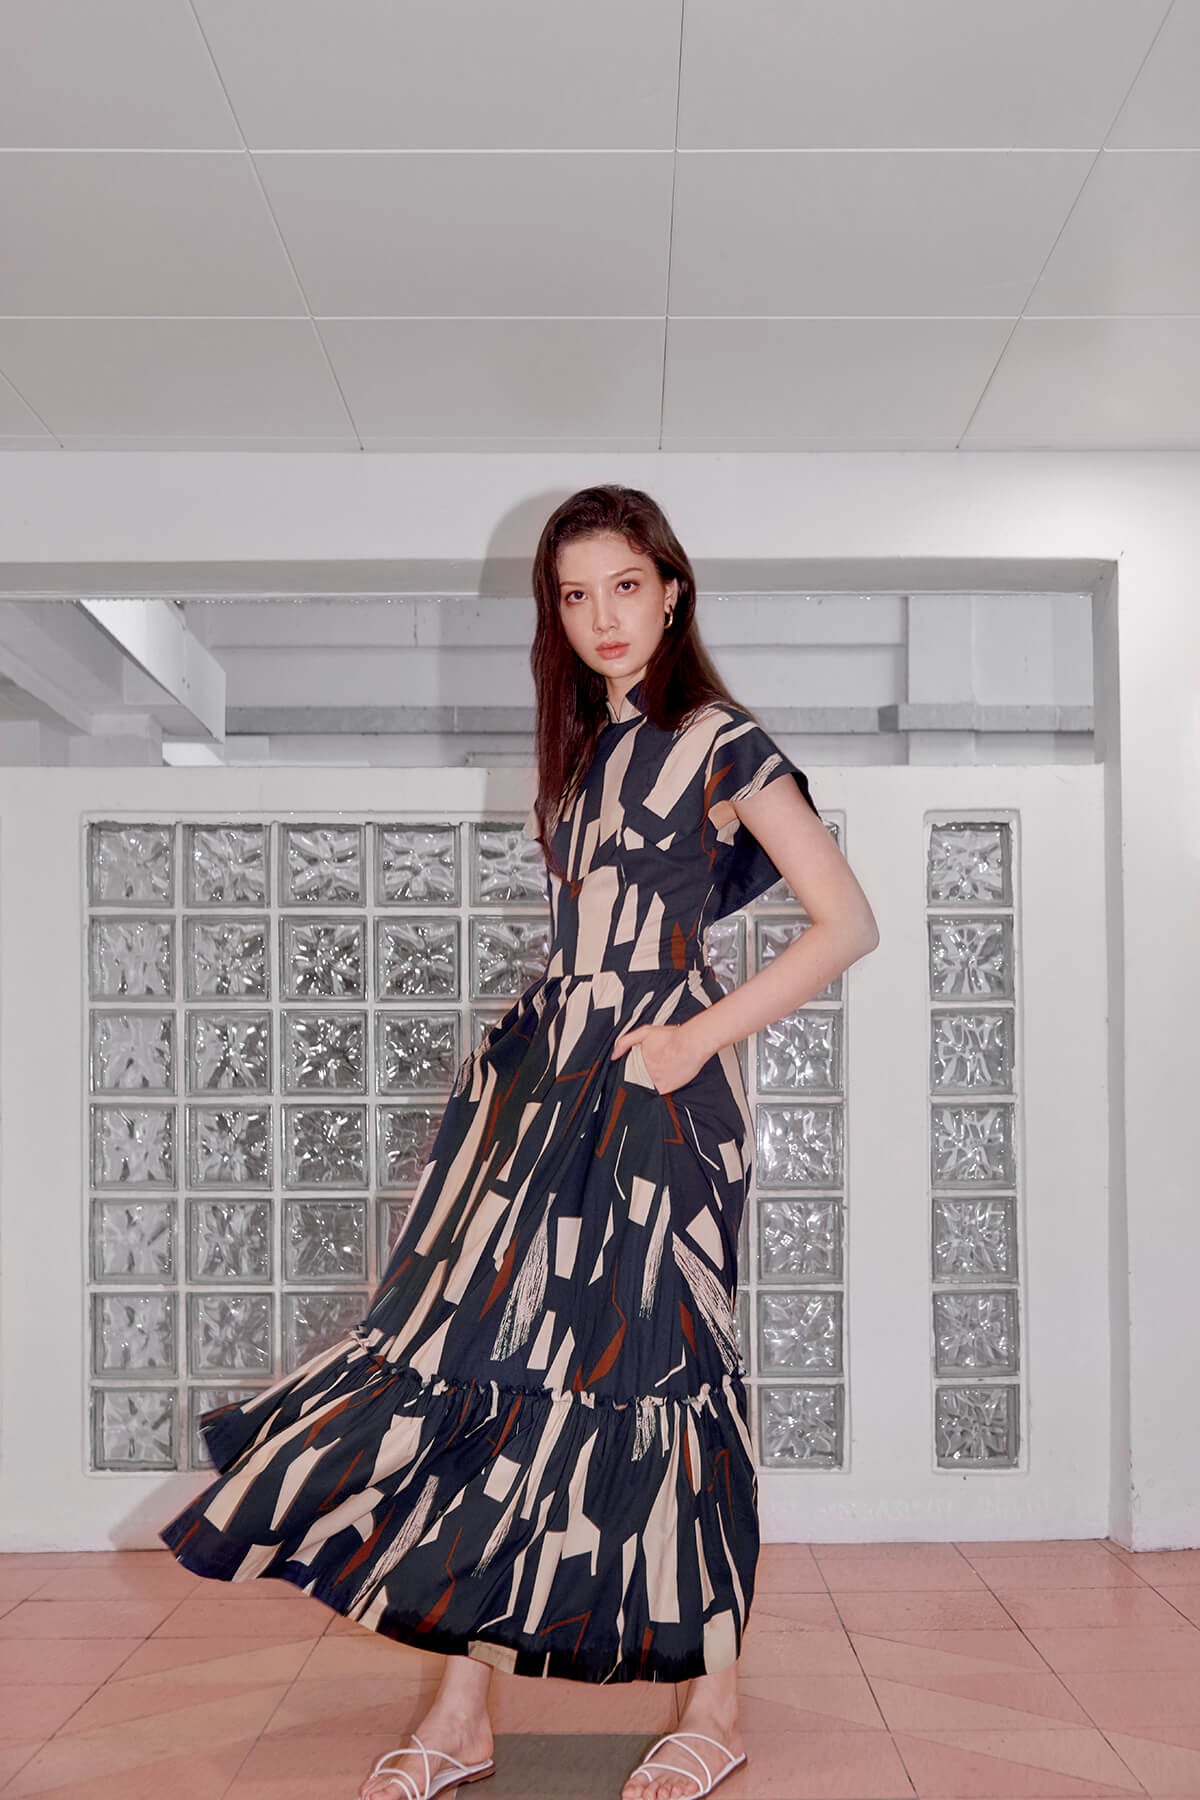 Tall Eurasian model standing in front of glass feature wall, her left hand in the side concealed pocket of her dress. Her dress is long and has a cheongsam collar. It is blue in color with cream rectangles and maroon stripes.